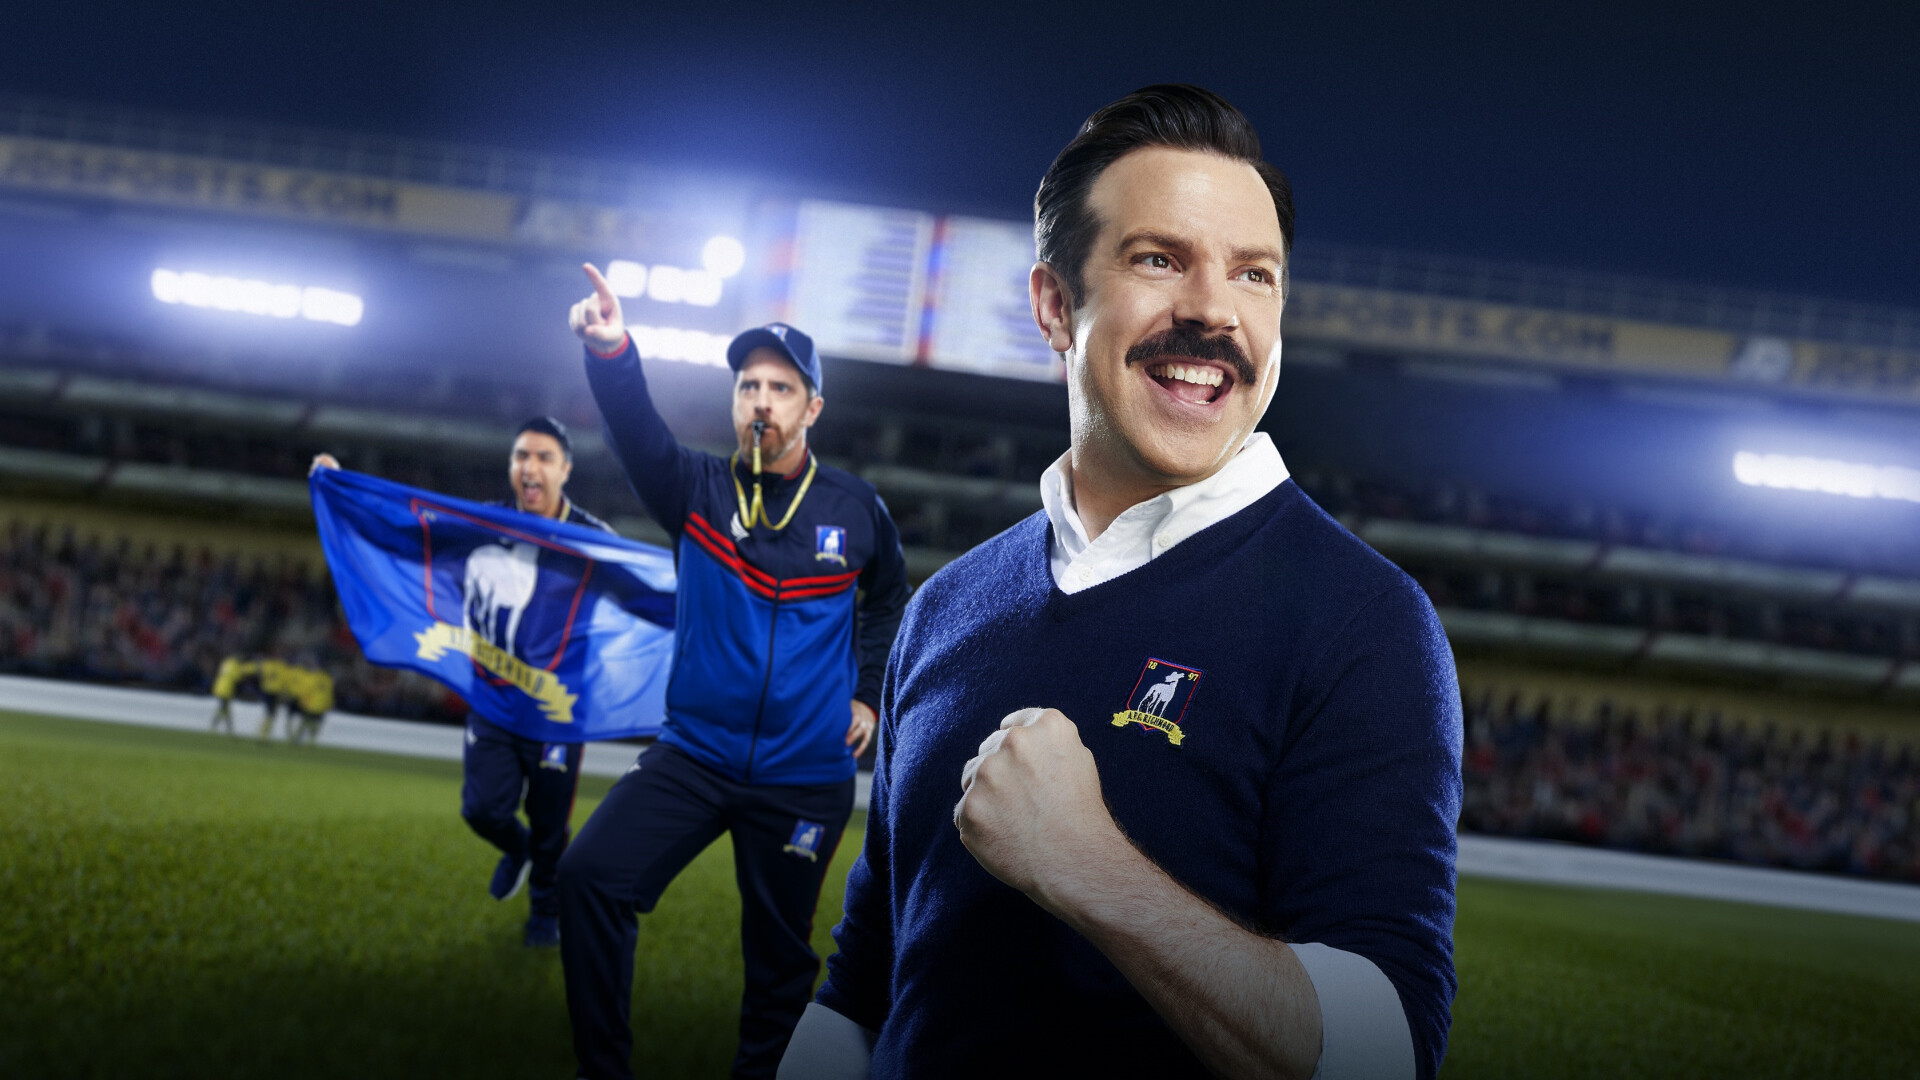 Ted Lasso: The series was developed by Jason Sudeikis, Bill Lawrence, Joe Kelly and Brendan Hunt. 1920x1080 Full HD Background.